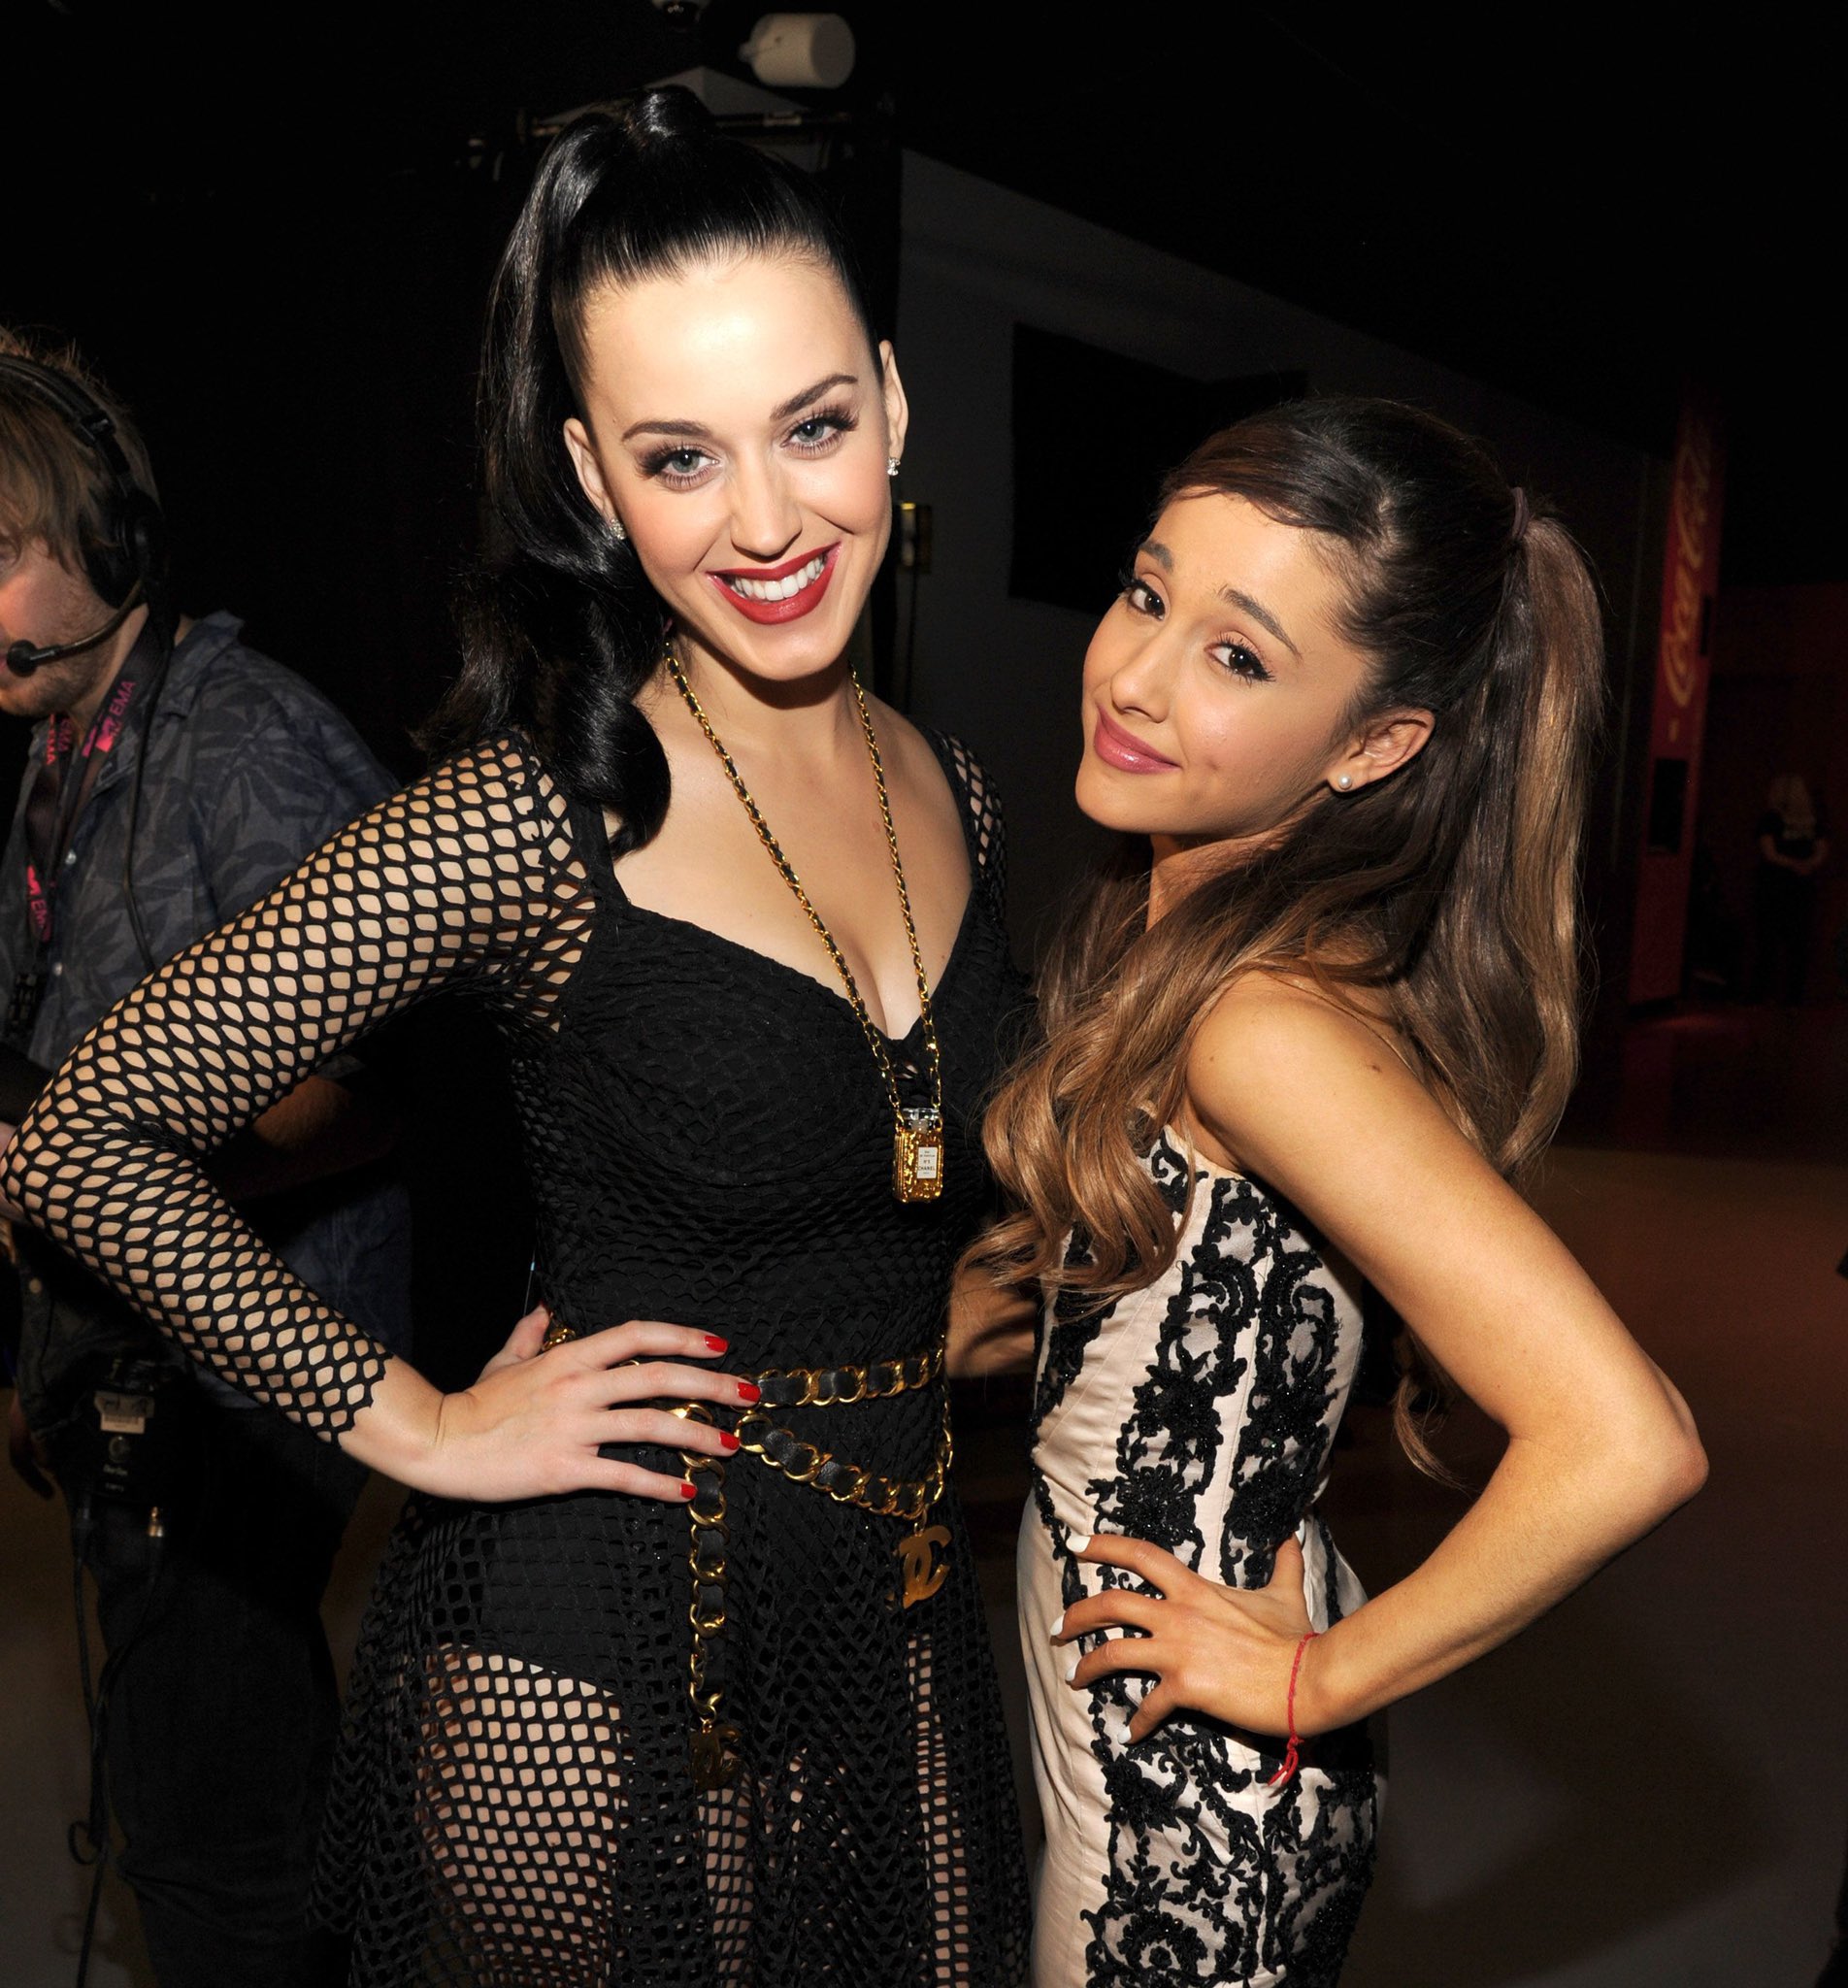 In order not to let Katy get embarrassed, I m here to wish miss Ariana Grande Happy Birthday  